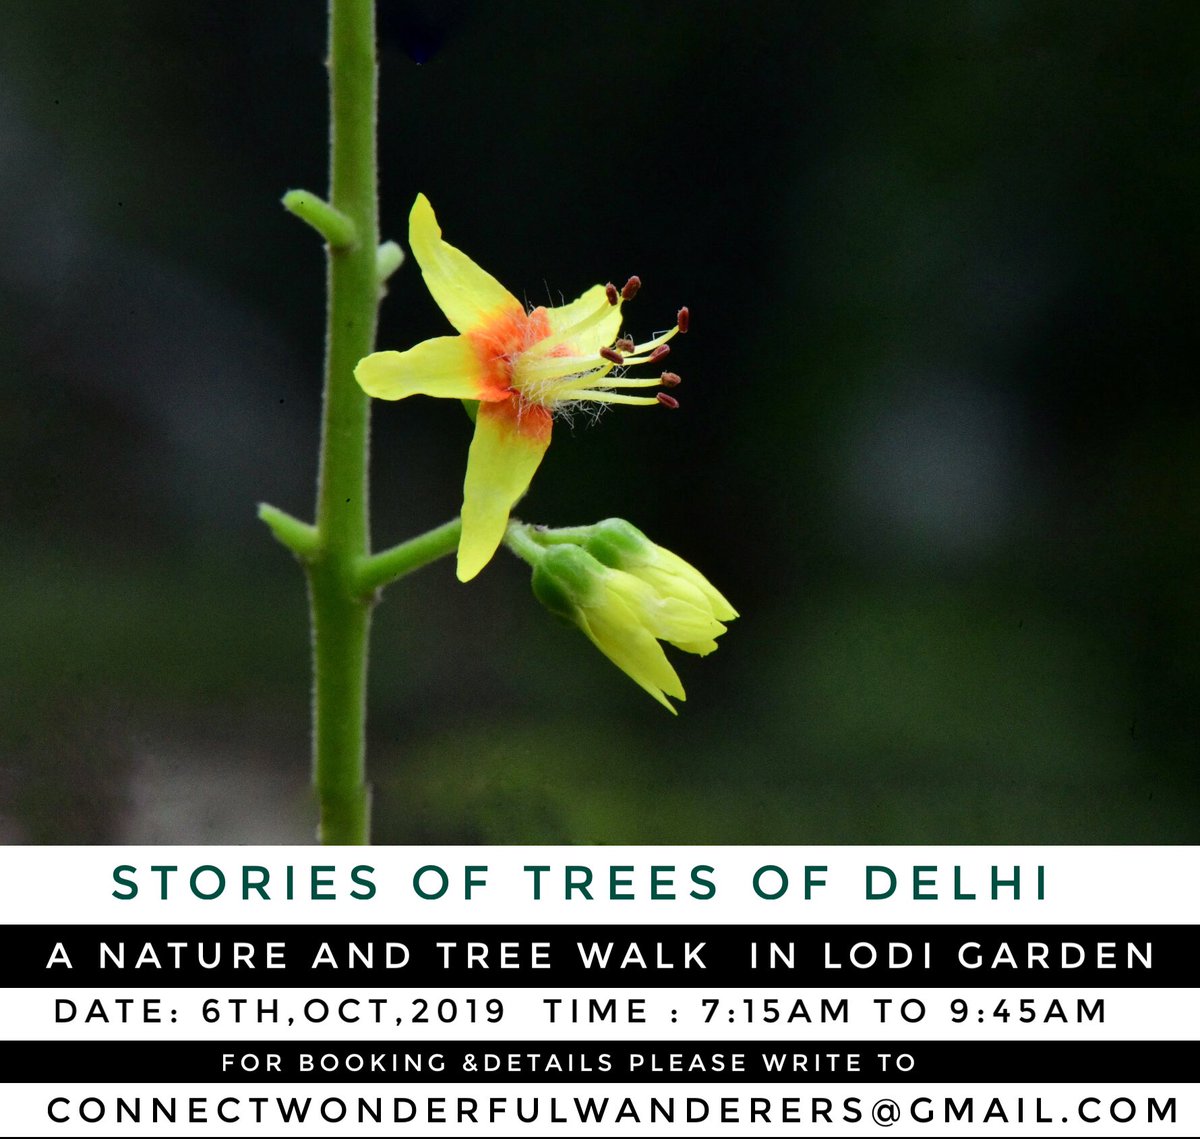 The Last Call for Tomorrow’s Tree Walk, #StoriesOfTreesOfDelhi .
Let me know if you need any help.
Write to connectwonderfulwanderers@gmail.com for completion of registration formalities .

Sunday at 7:15 AM facebook.com/events/6246635…